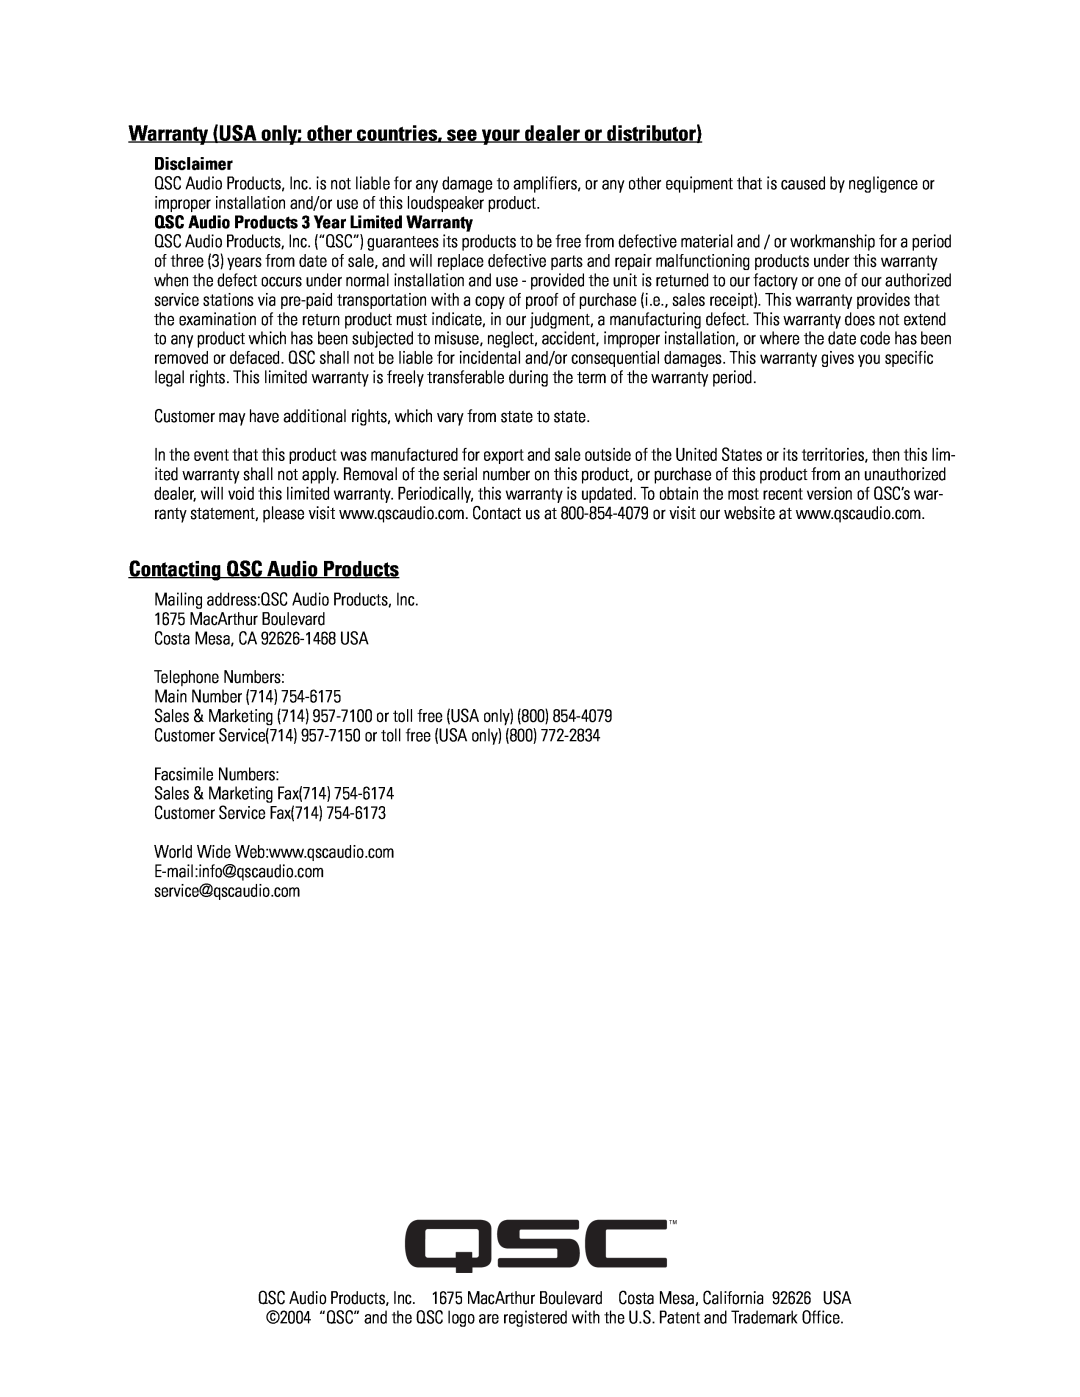 QSC Audio SC-322 specifications Contacting QSC Audio Products, Disclaimer, QSC Audio Products 3 Year Limited Warranty 